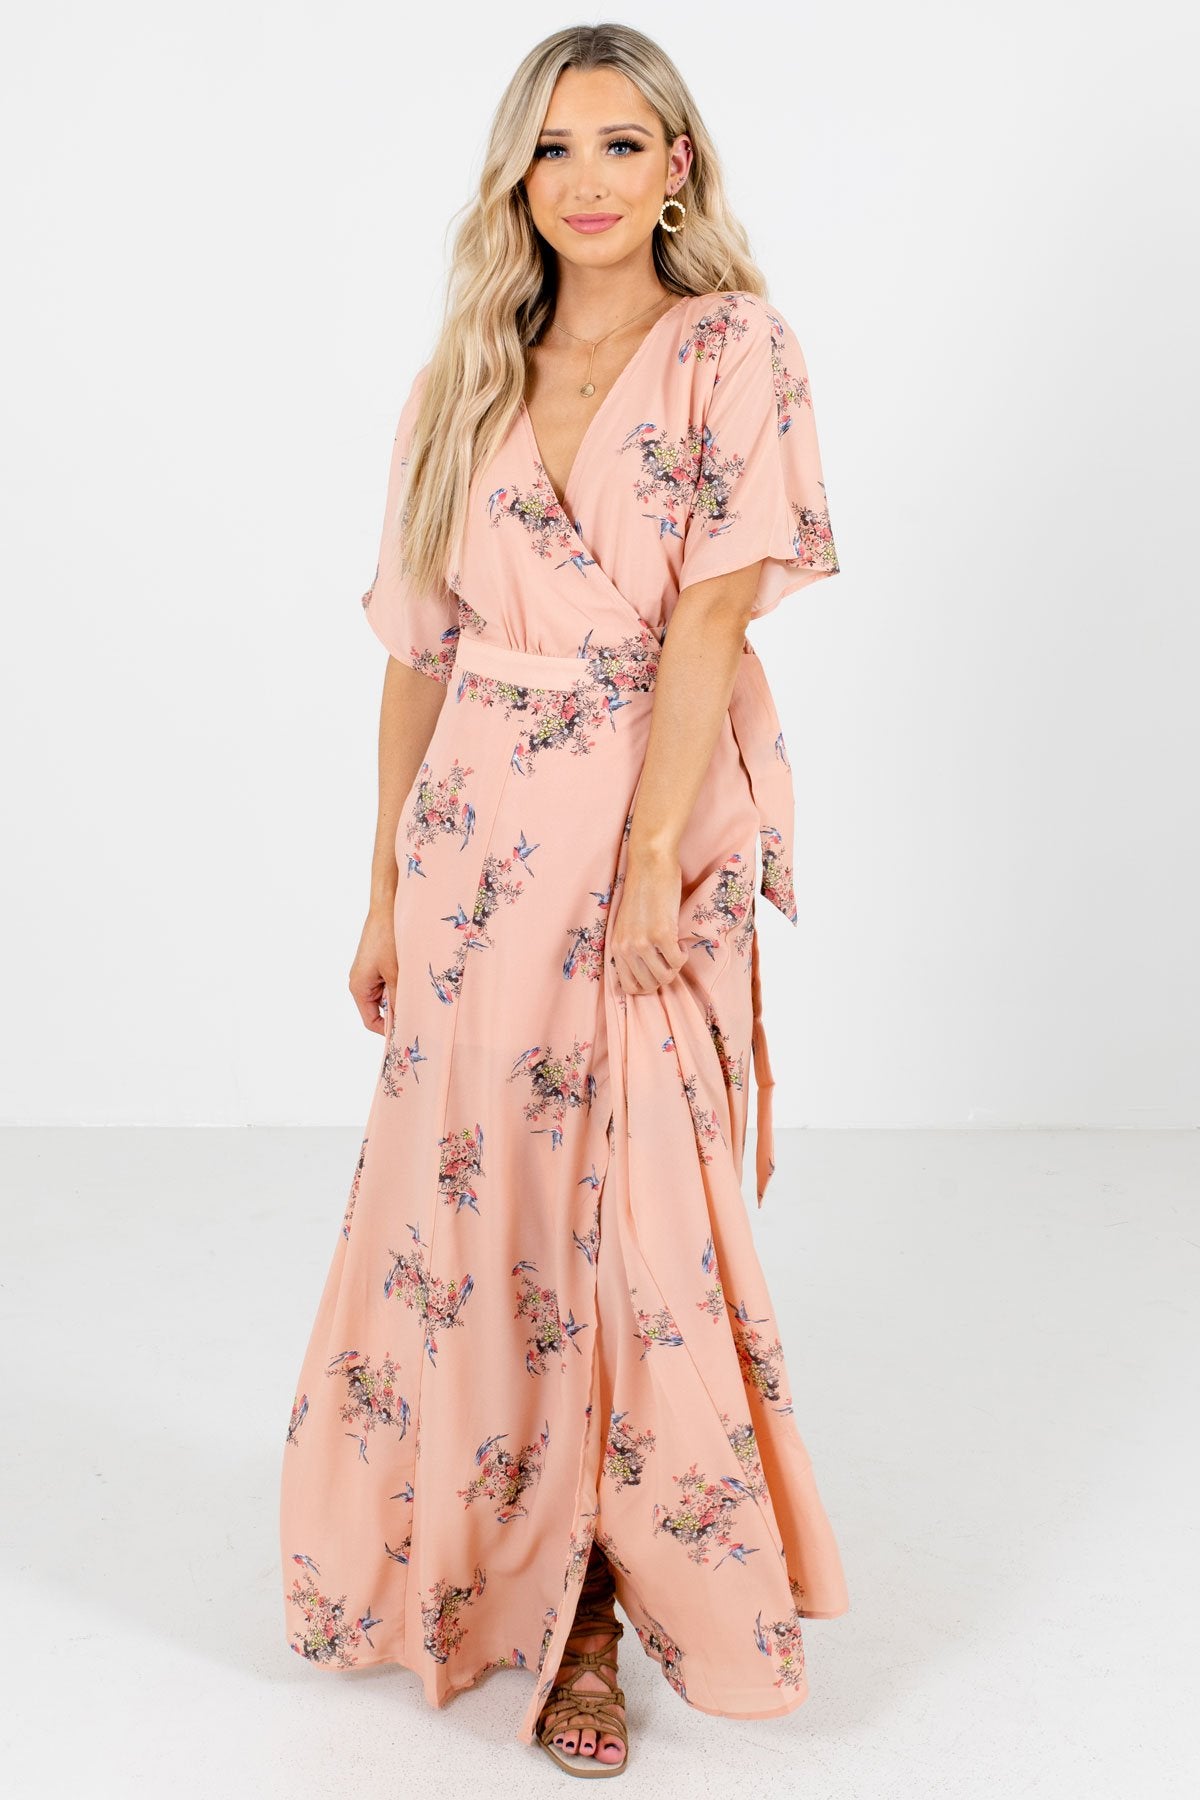 Peach Pink Floral Patterned Boutique Maxi Dresses for Women 